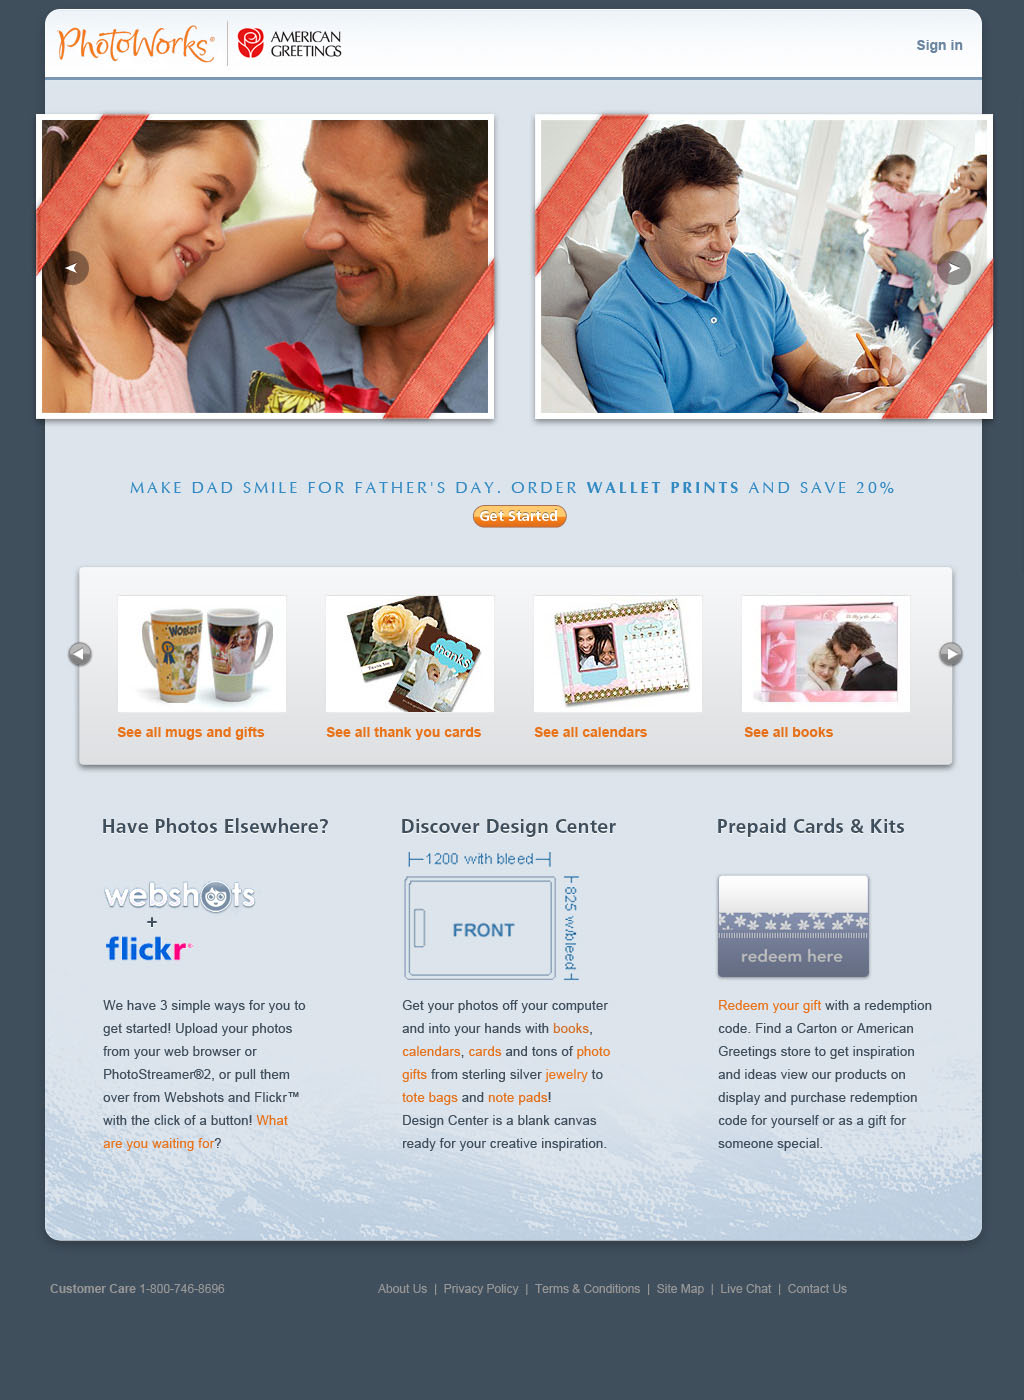 Landing page showing the father’s day promotion